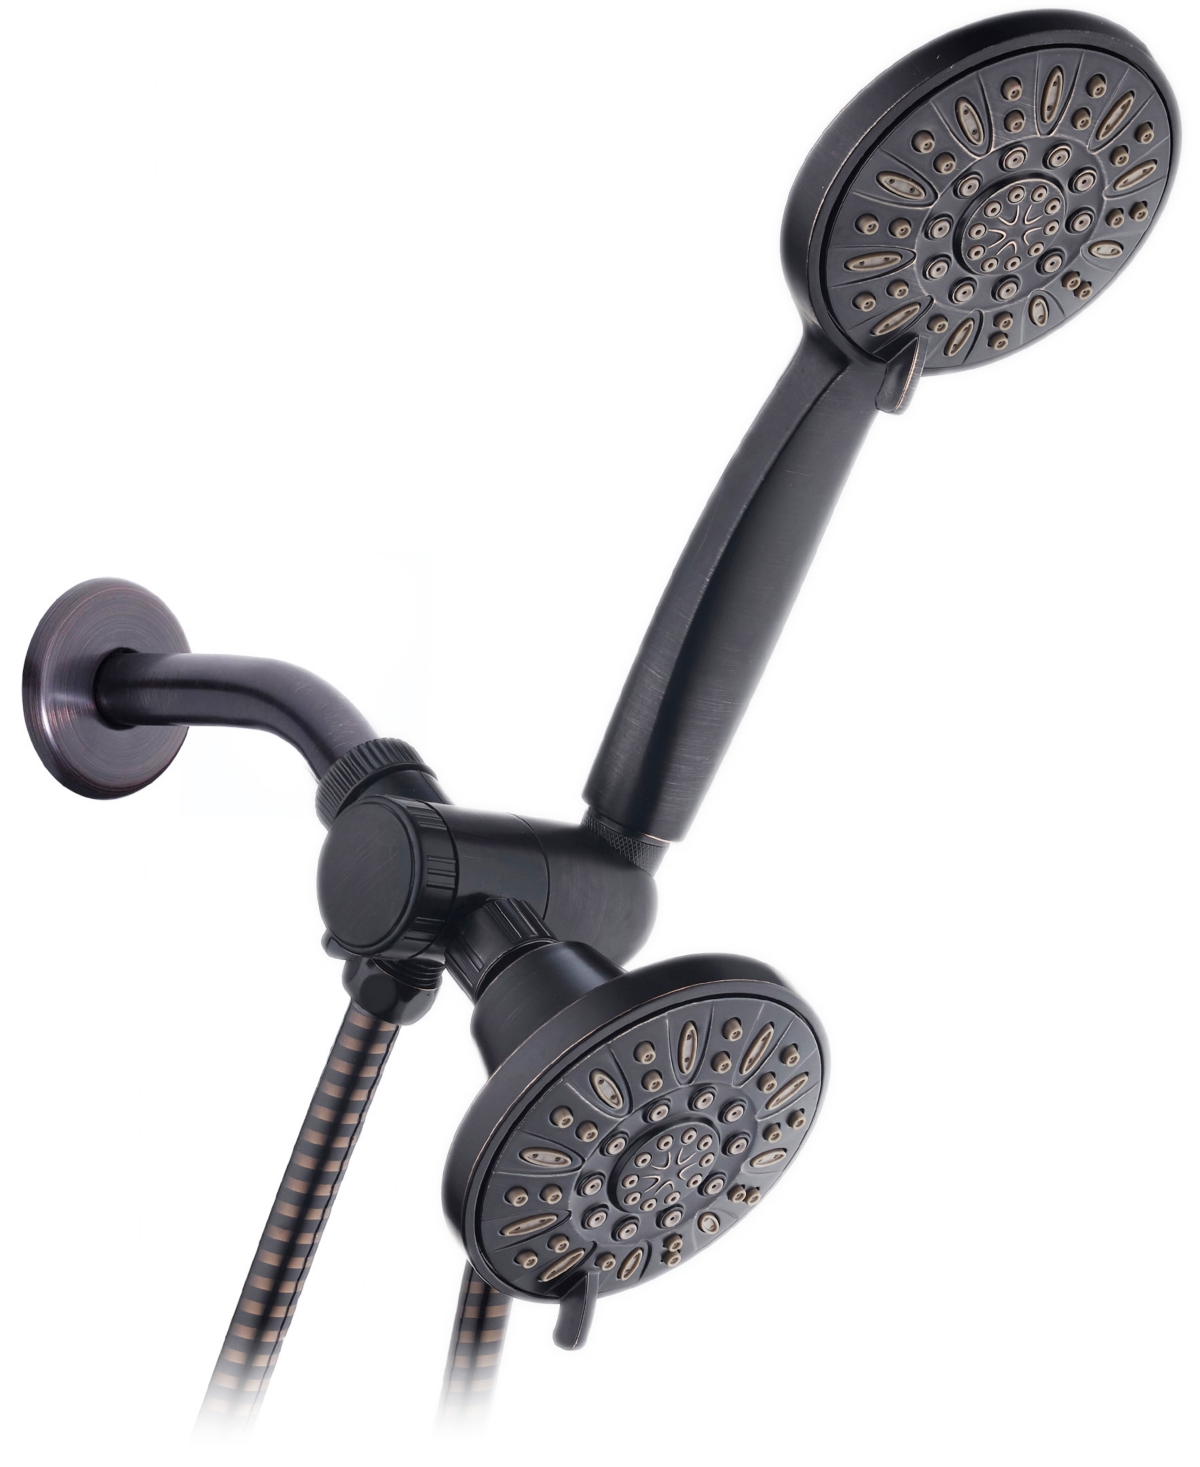 High-Pressure 48-Setting Dual Shower Head Combo with Extra-long 6 Foot Hose - Oil Rubbed Bronze